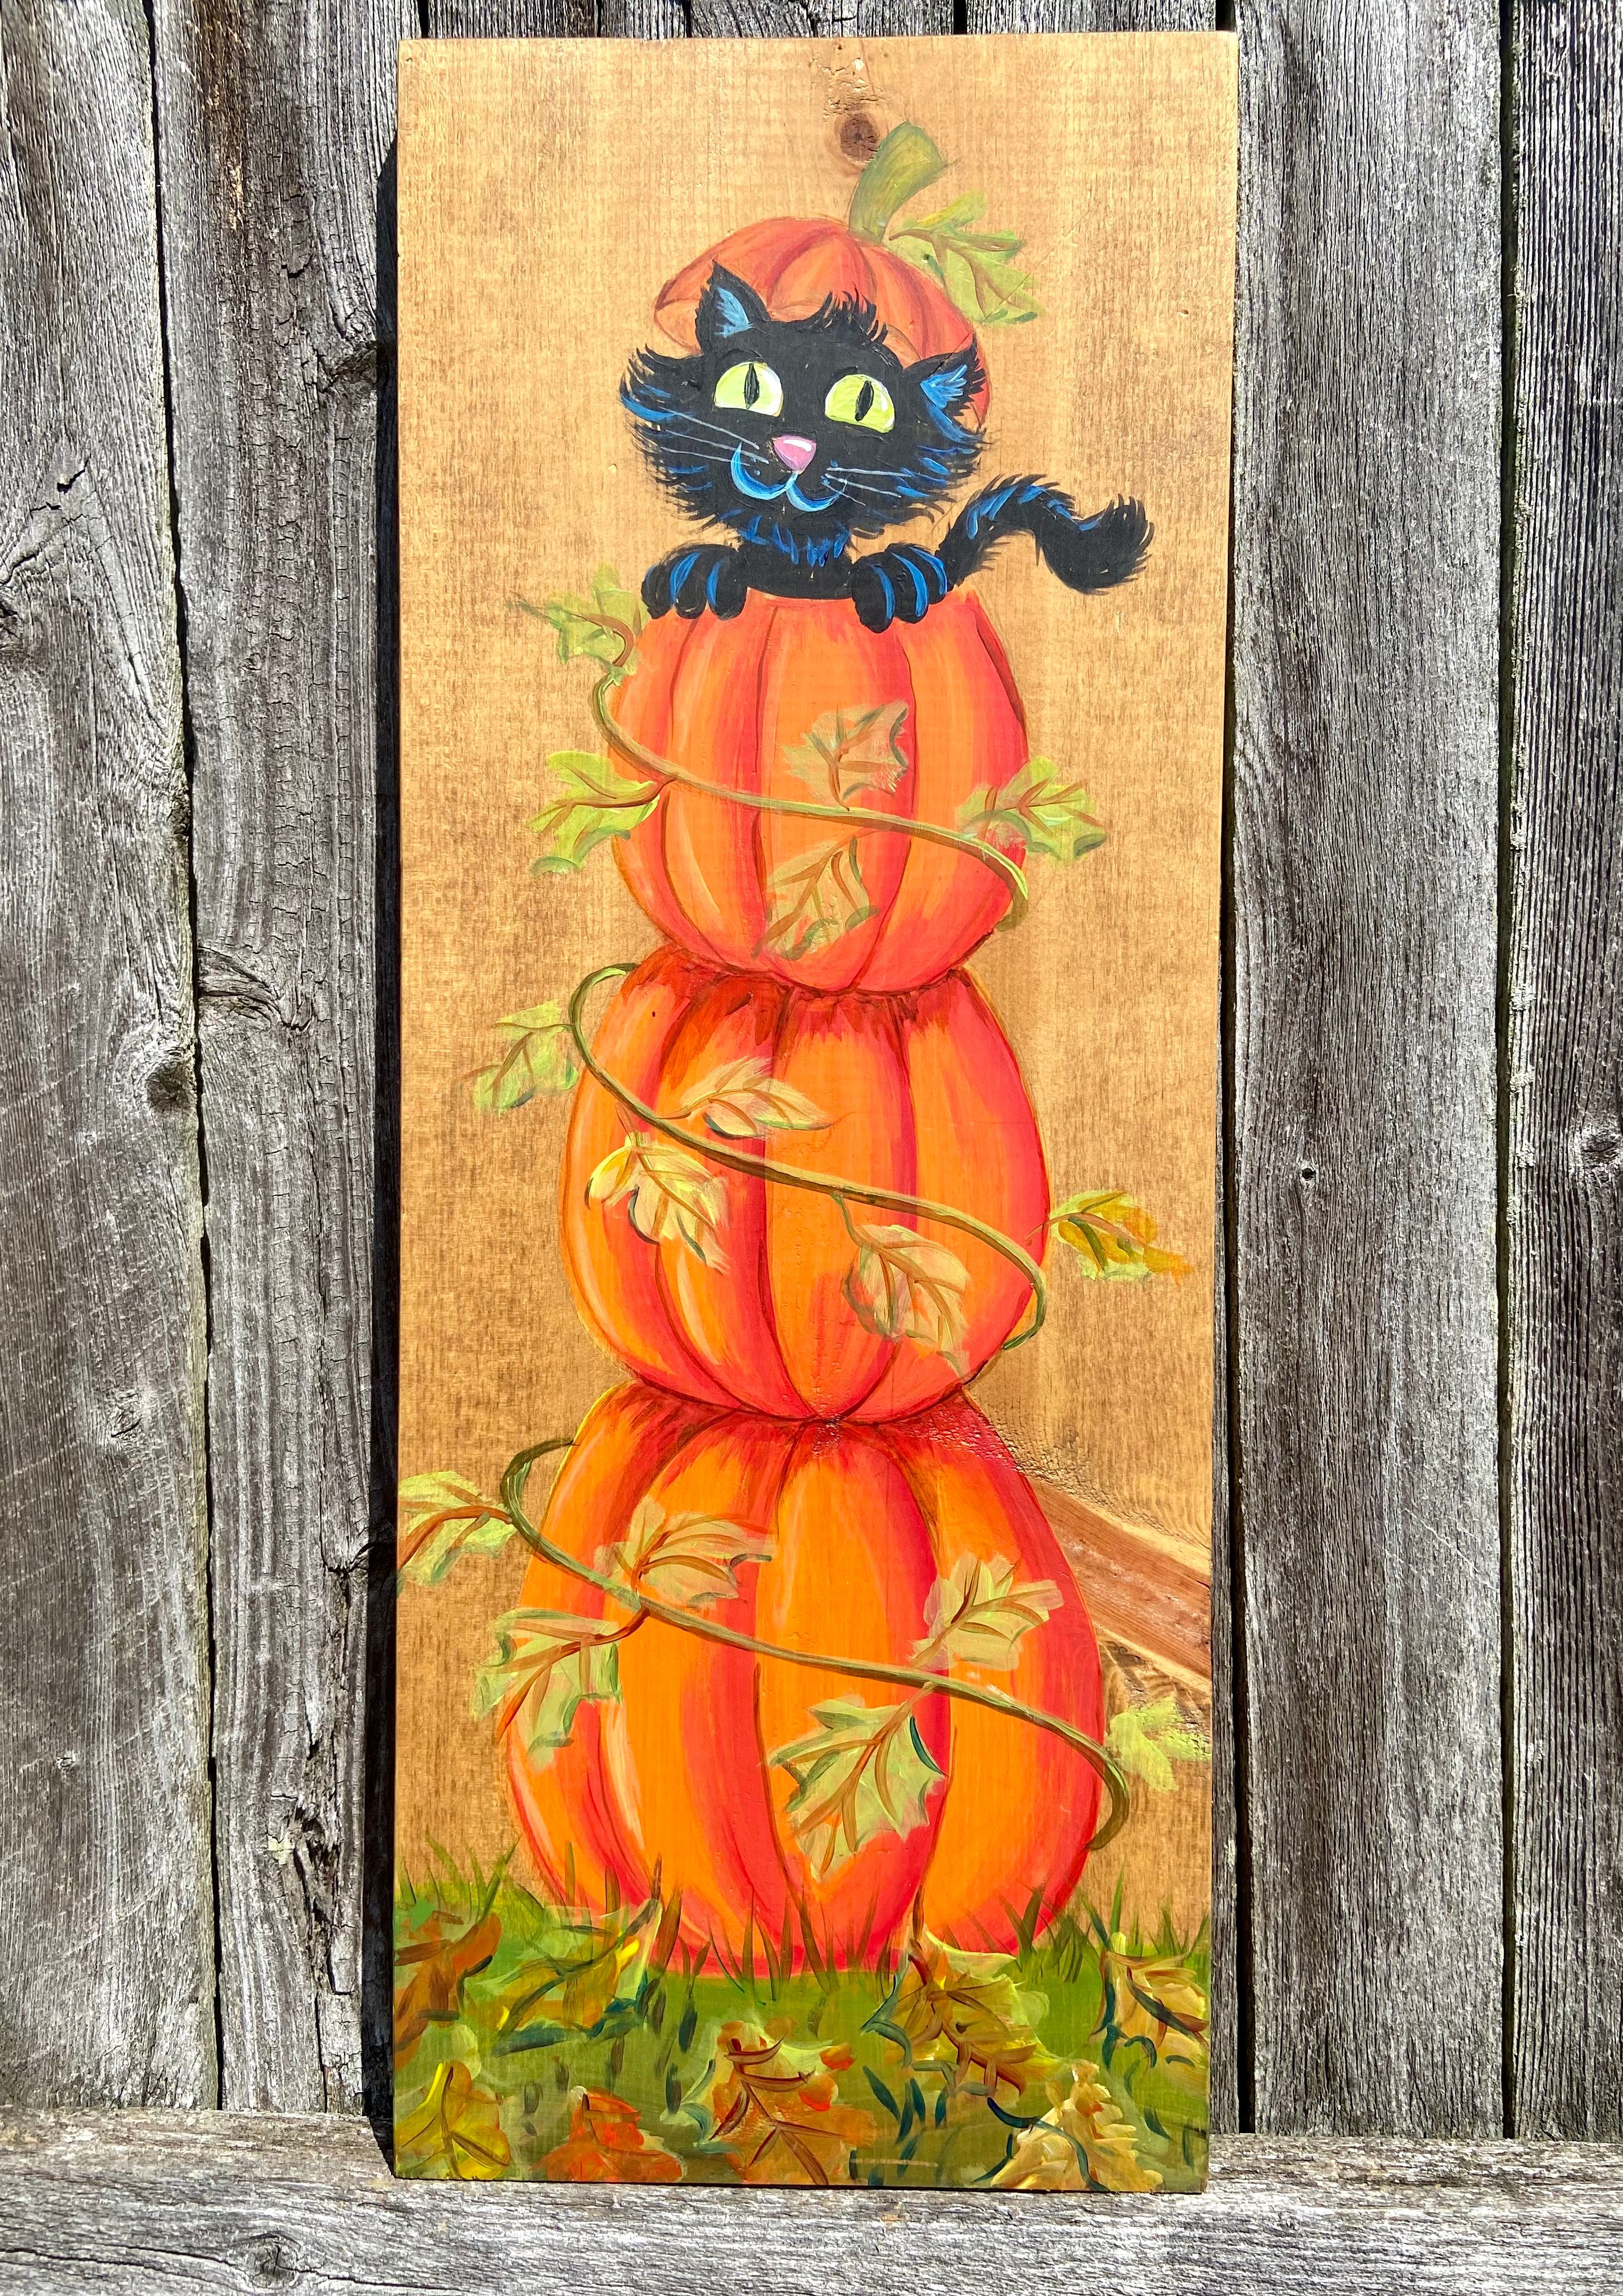 A Pumpkin Kitty experience project by Yaymaker